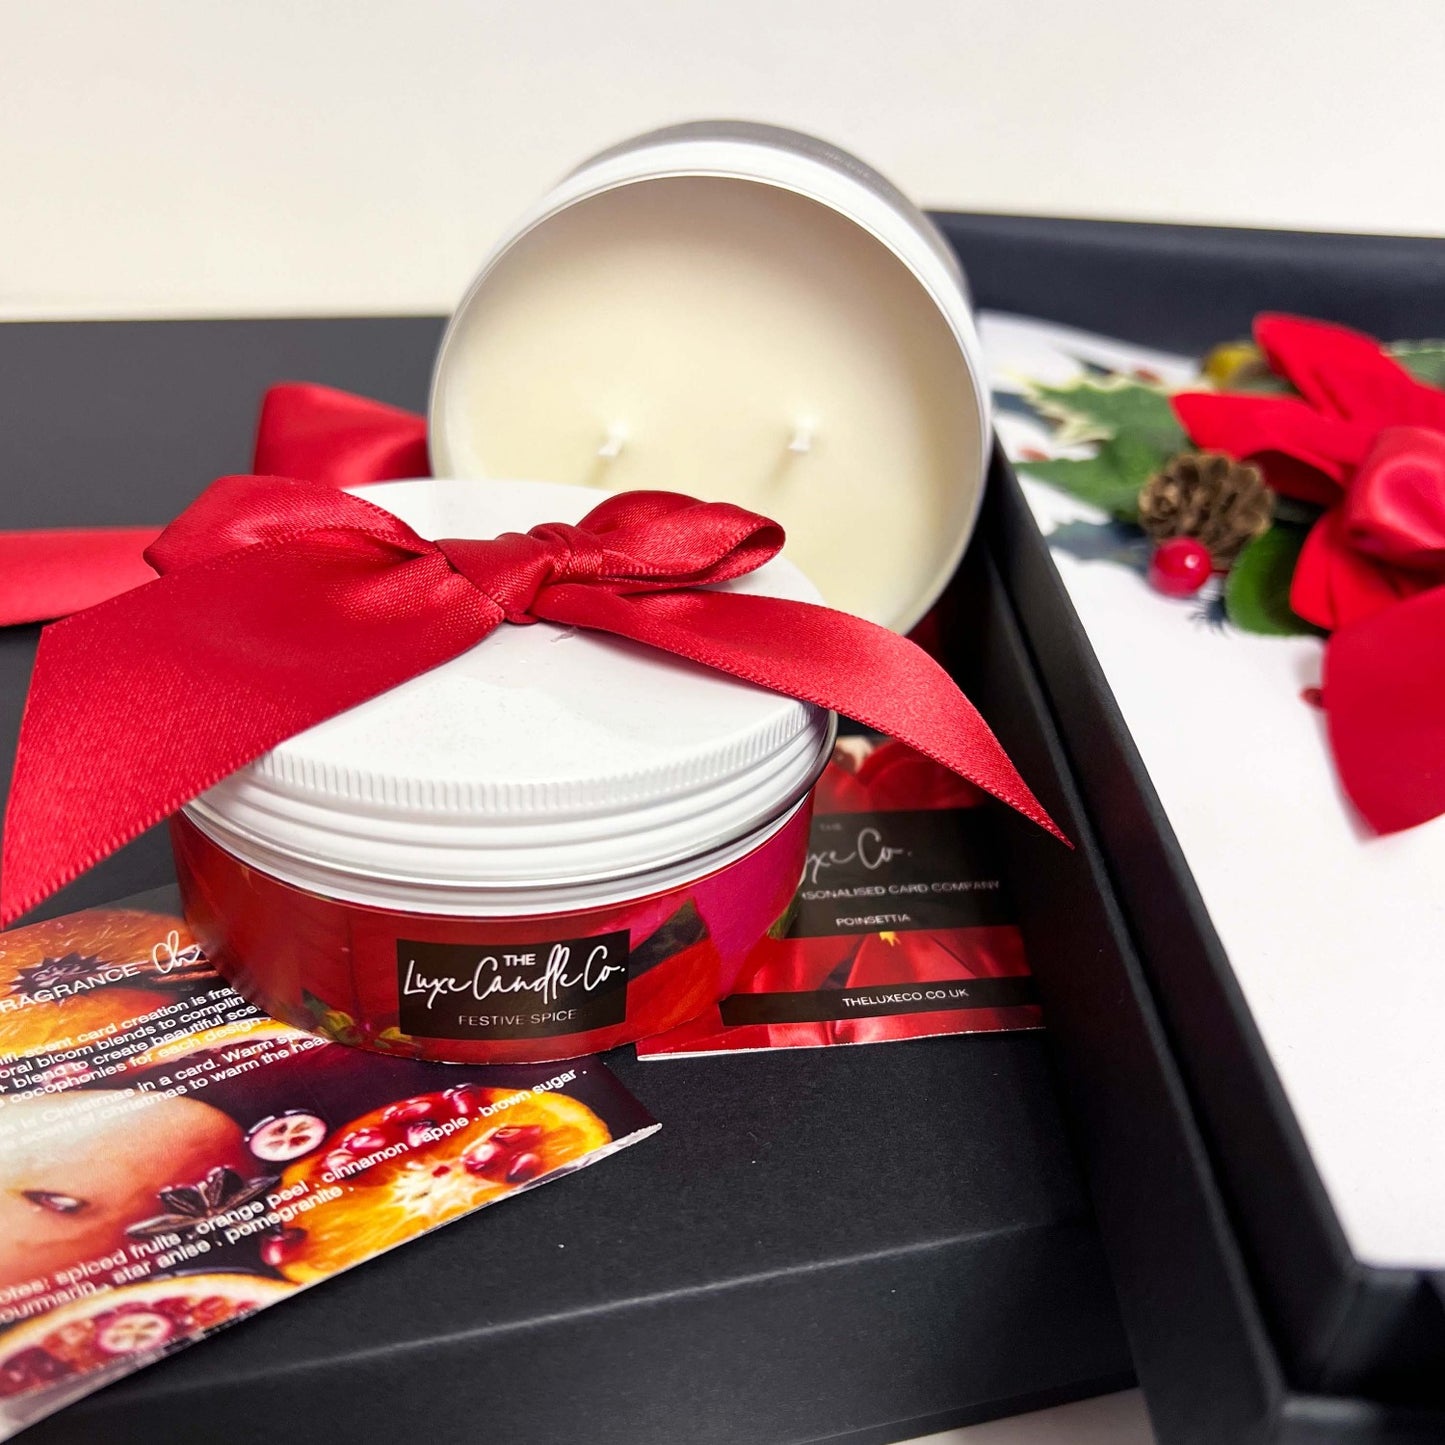 Luxury Poinsettia Christmas candles to match the poinsettia cards